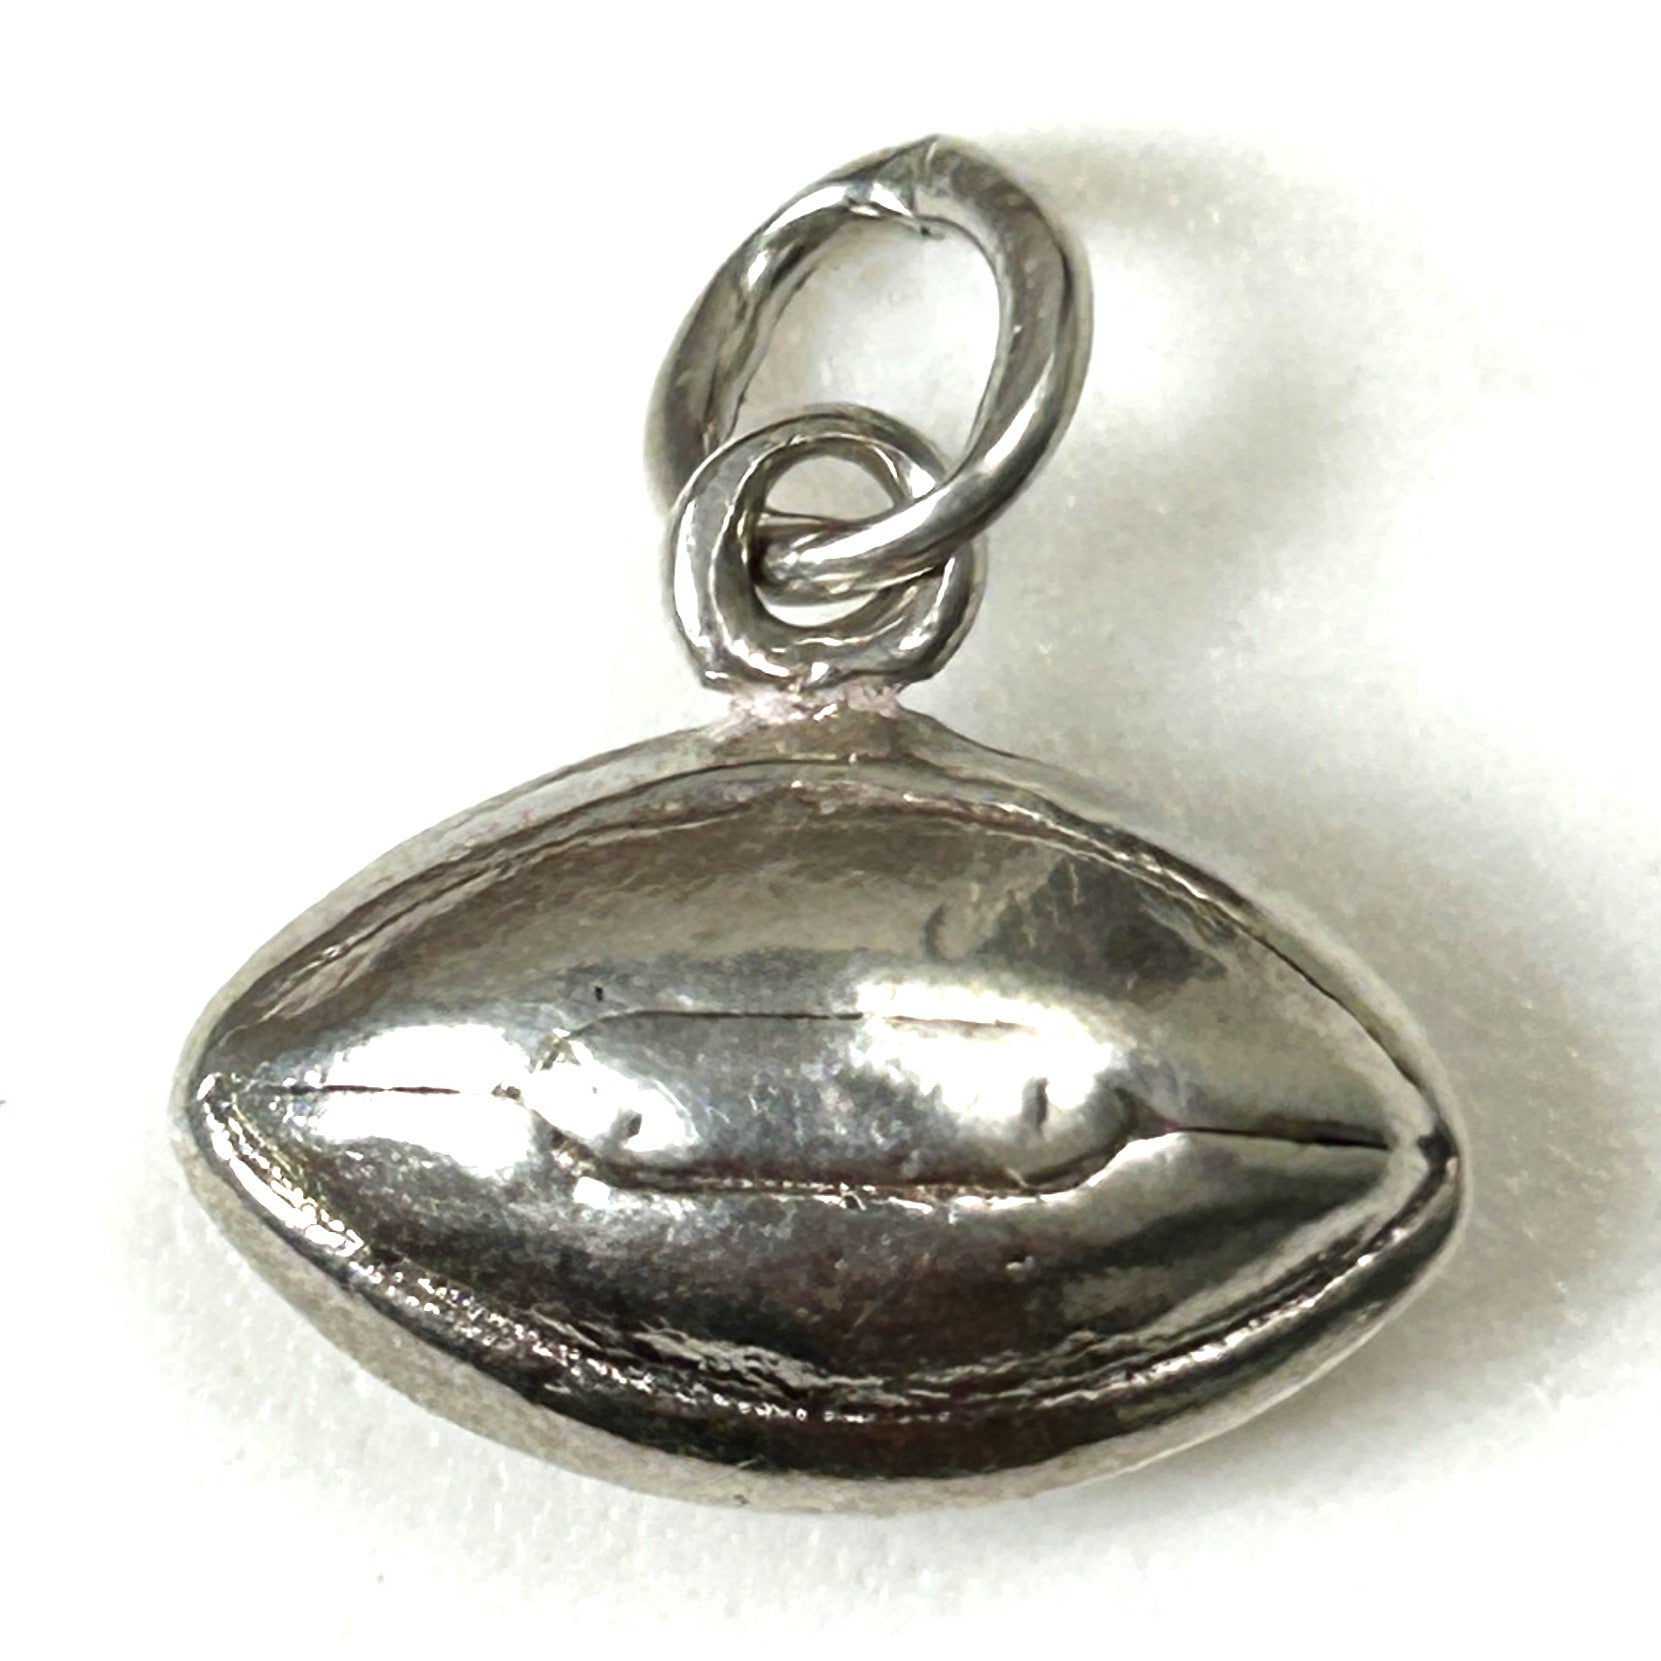 Miniature Silver “Rugby Ball” Charm Pendant